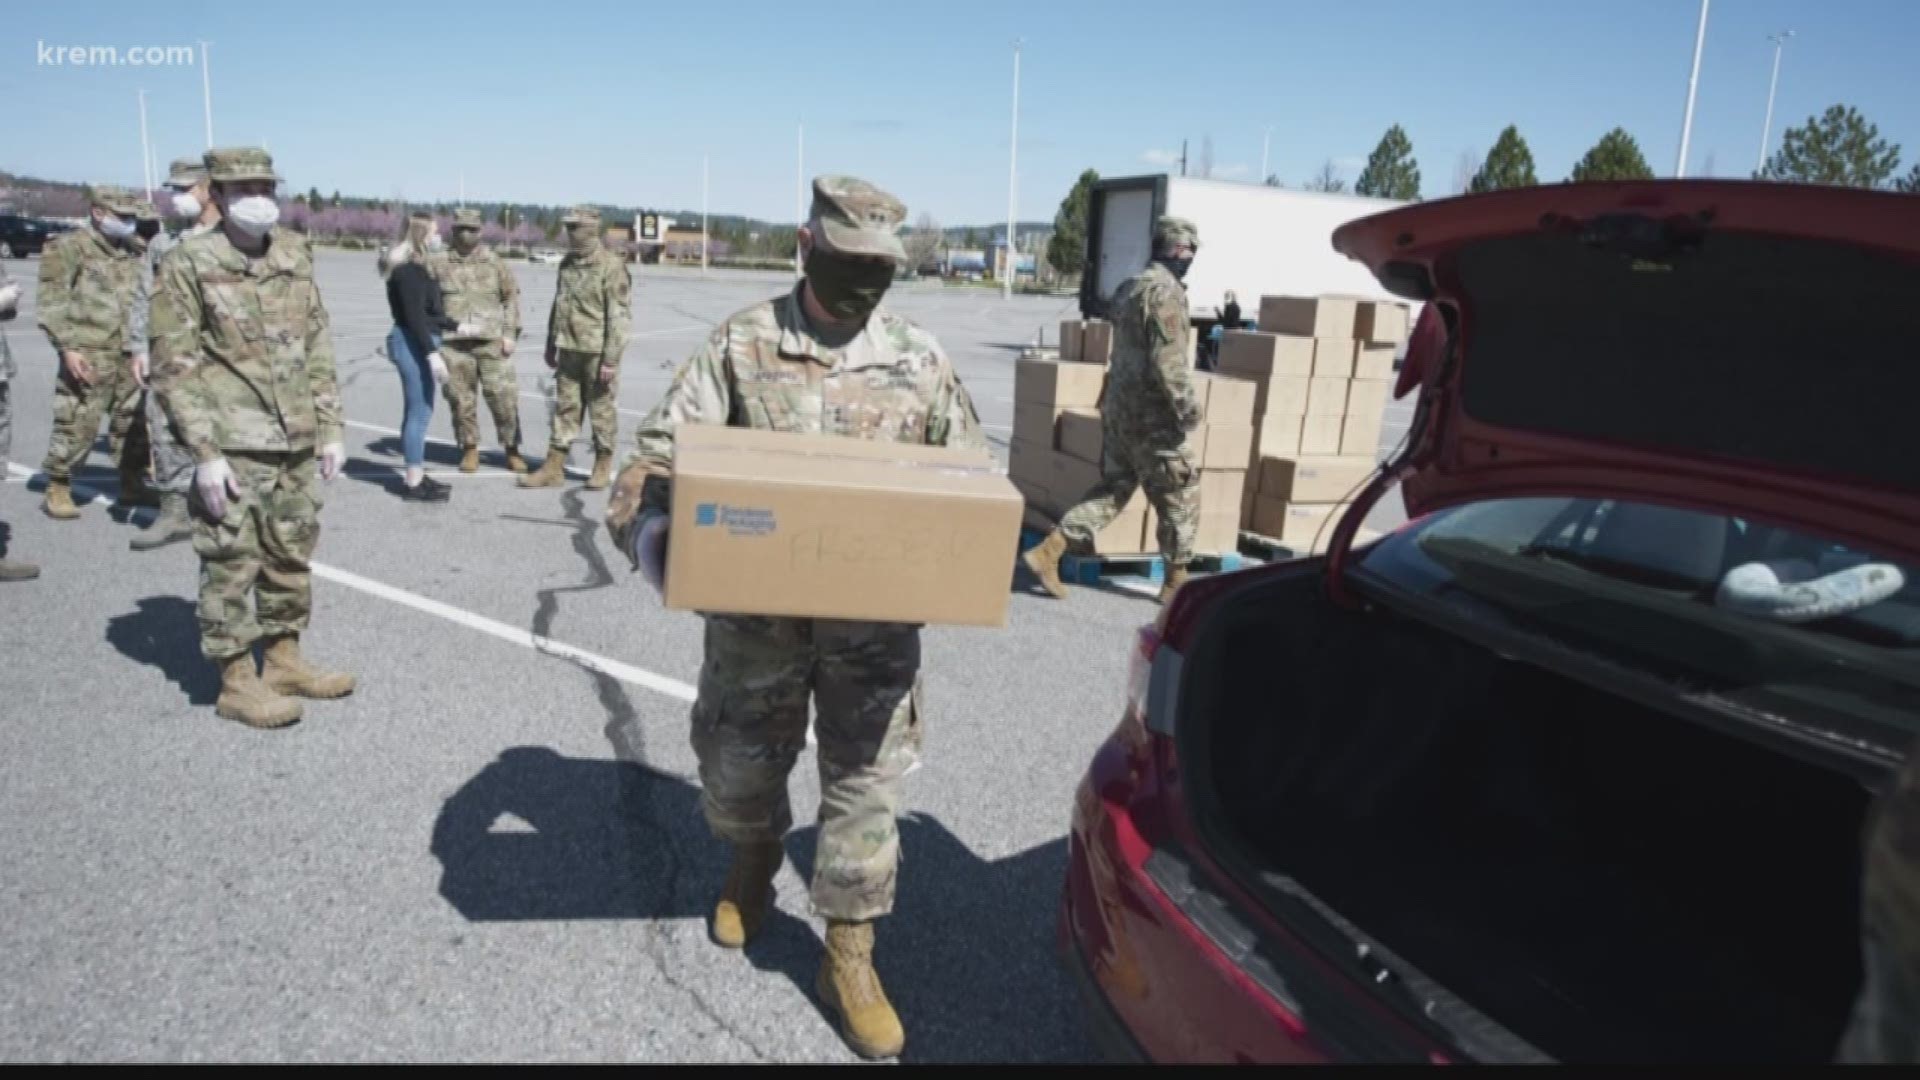 Several local leaders in Eastern Washington are calling on Governor Inslee to keep Washington National Guard members in local food banks.